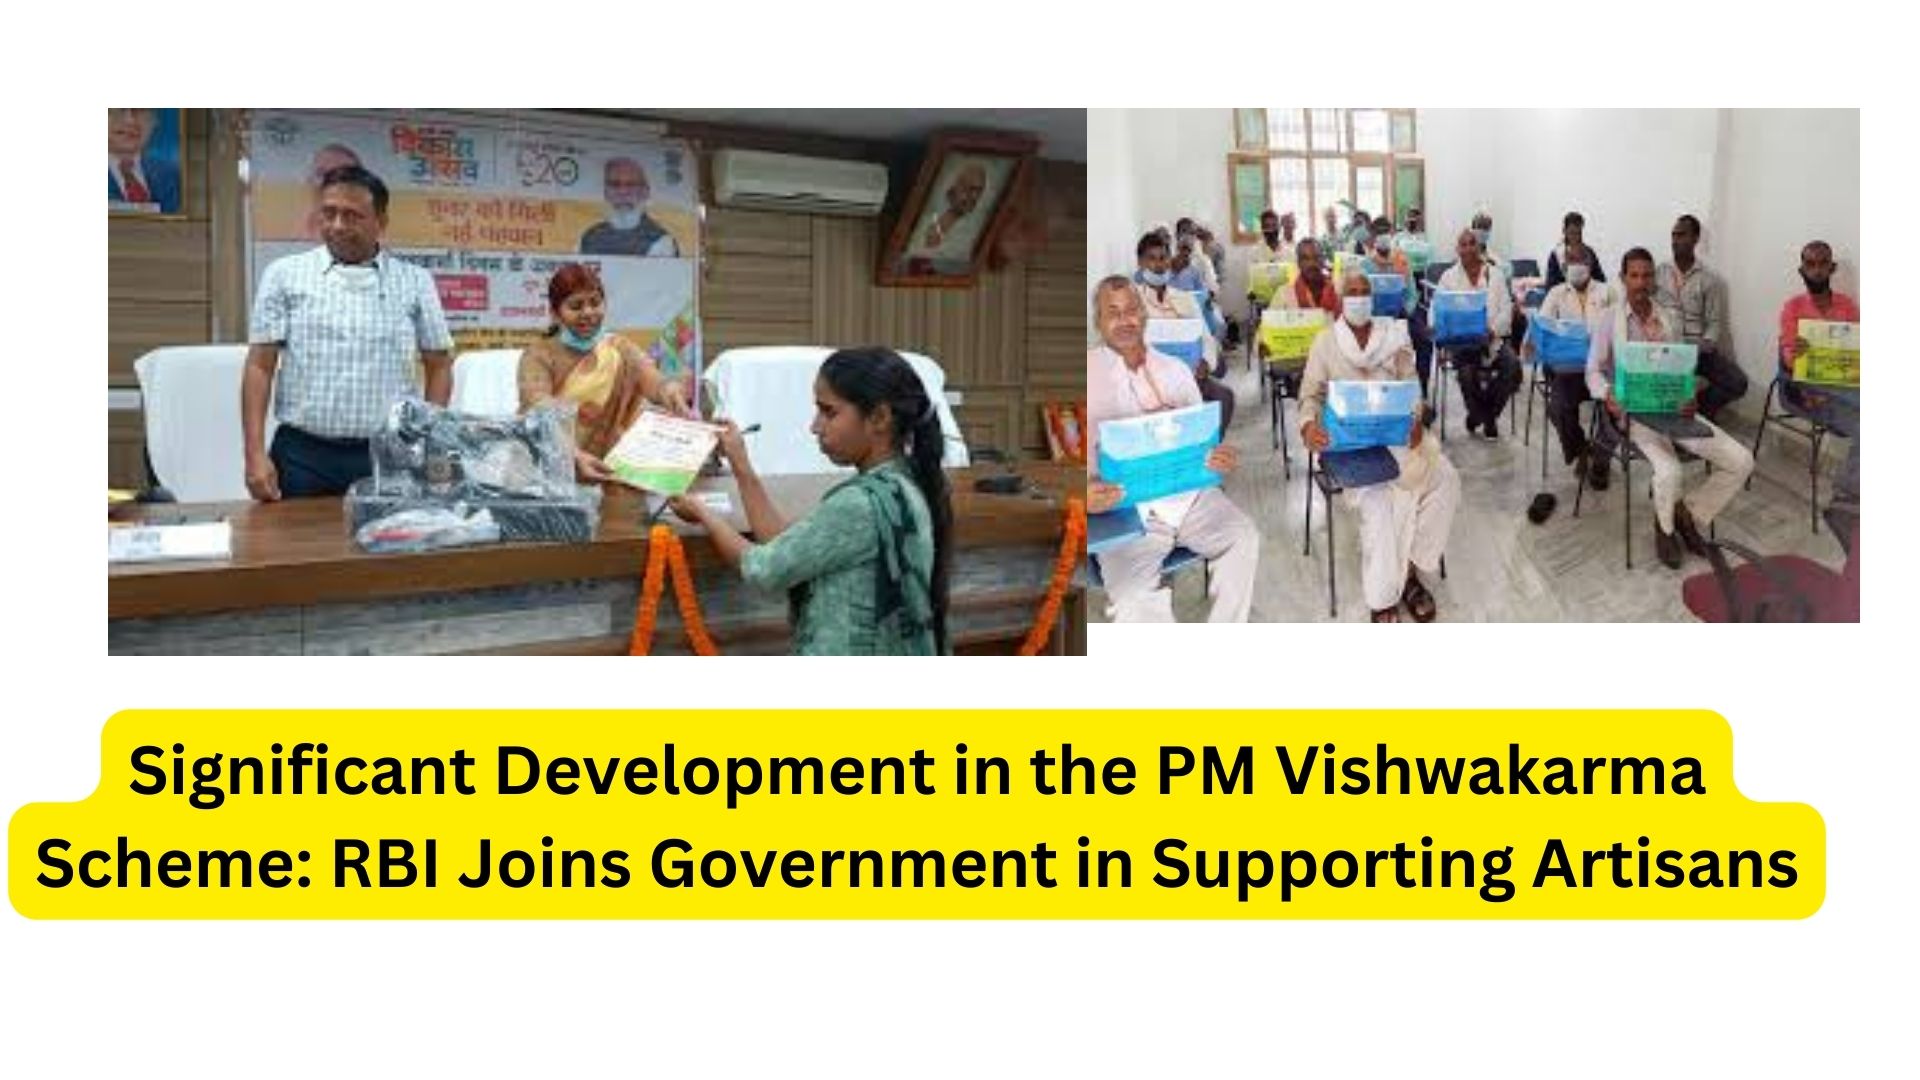 Significant Development in the PM Vishwakarma Scheme: RBI Joins Government in Supporting Artisans